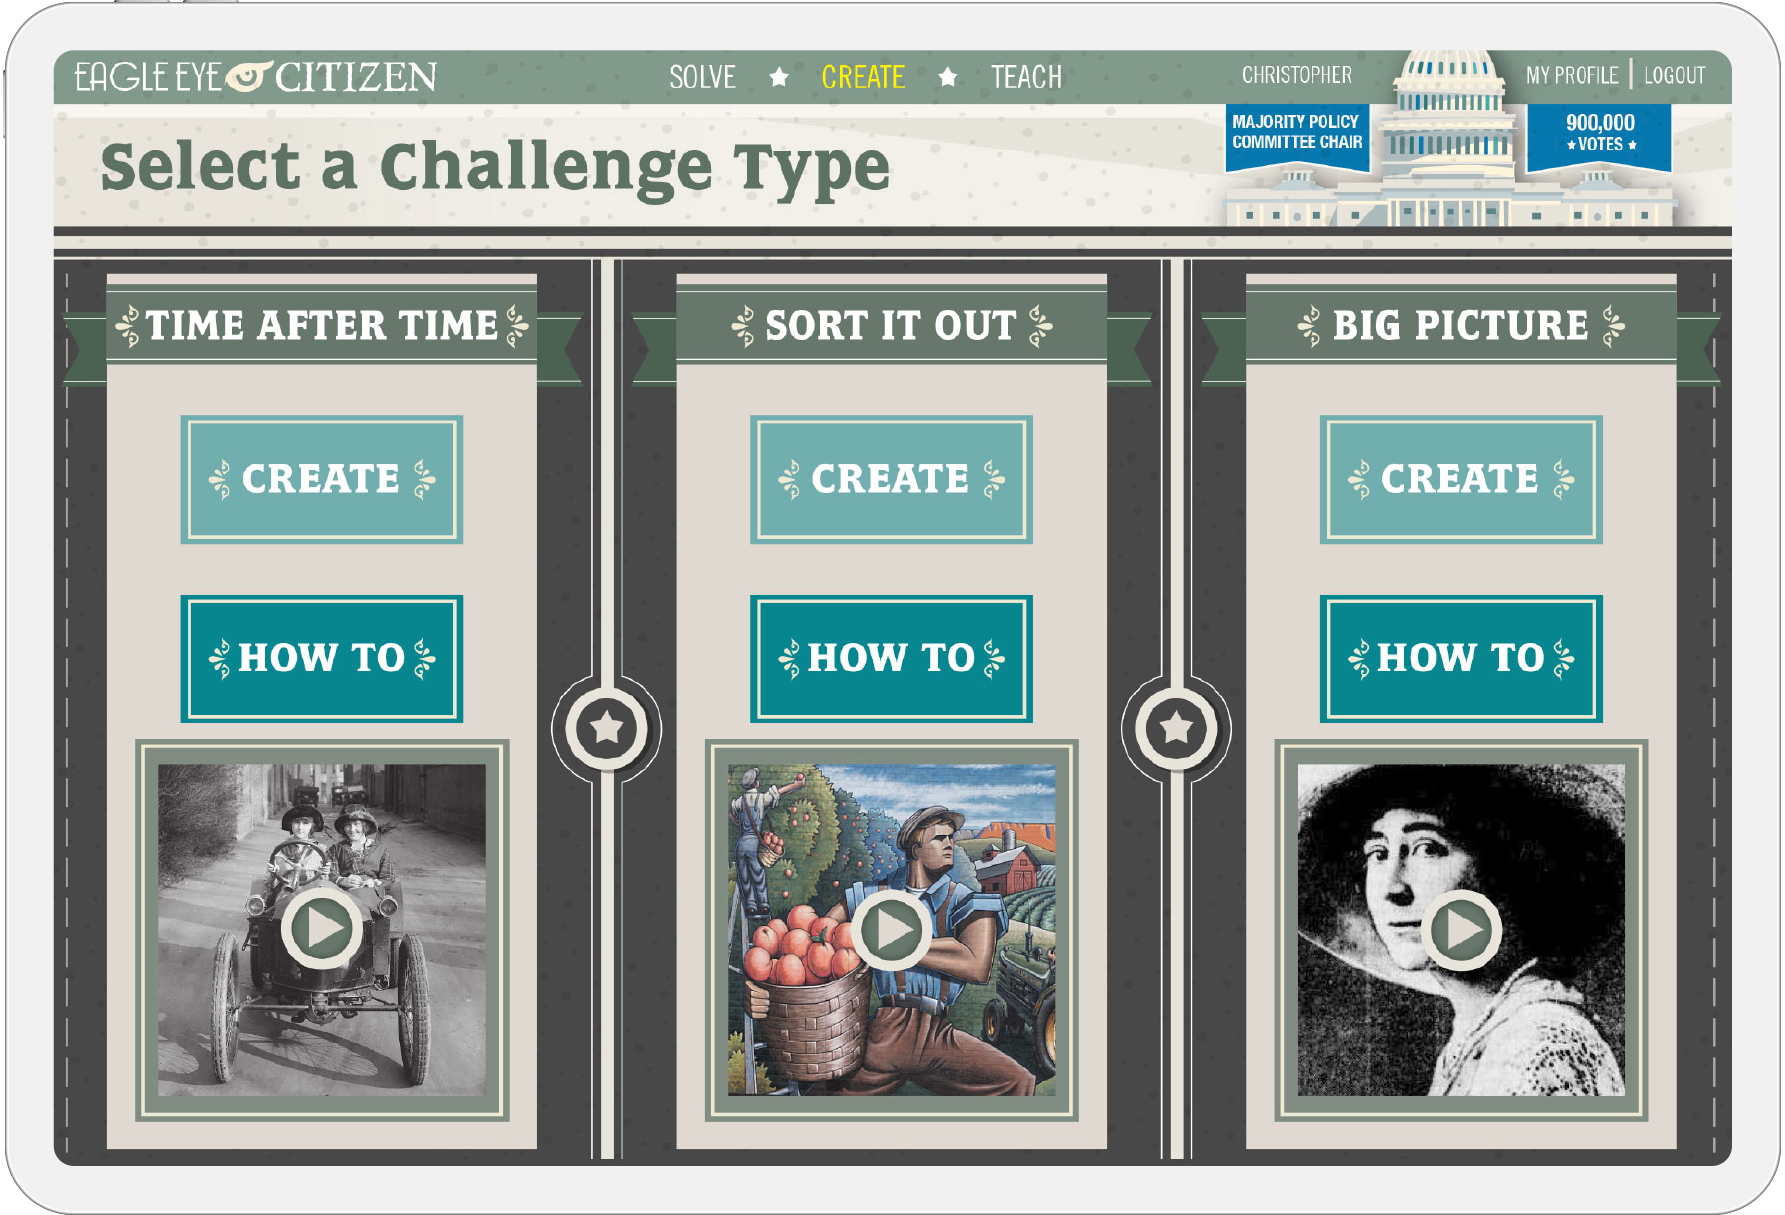 Screengrab from the Eagle Eye Citizen website showing different challenge types: "Time After Time, Sort It Out, Big Picture"